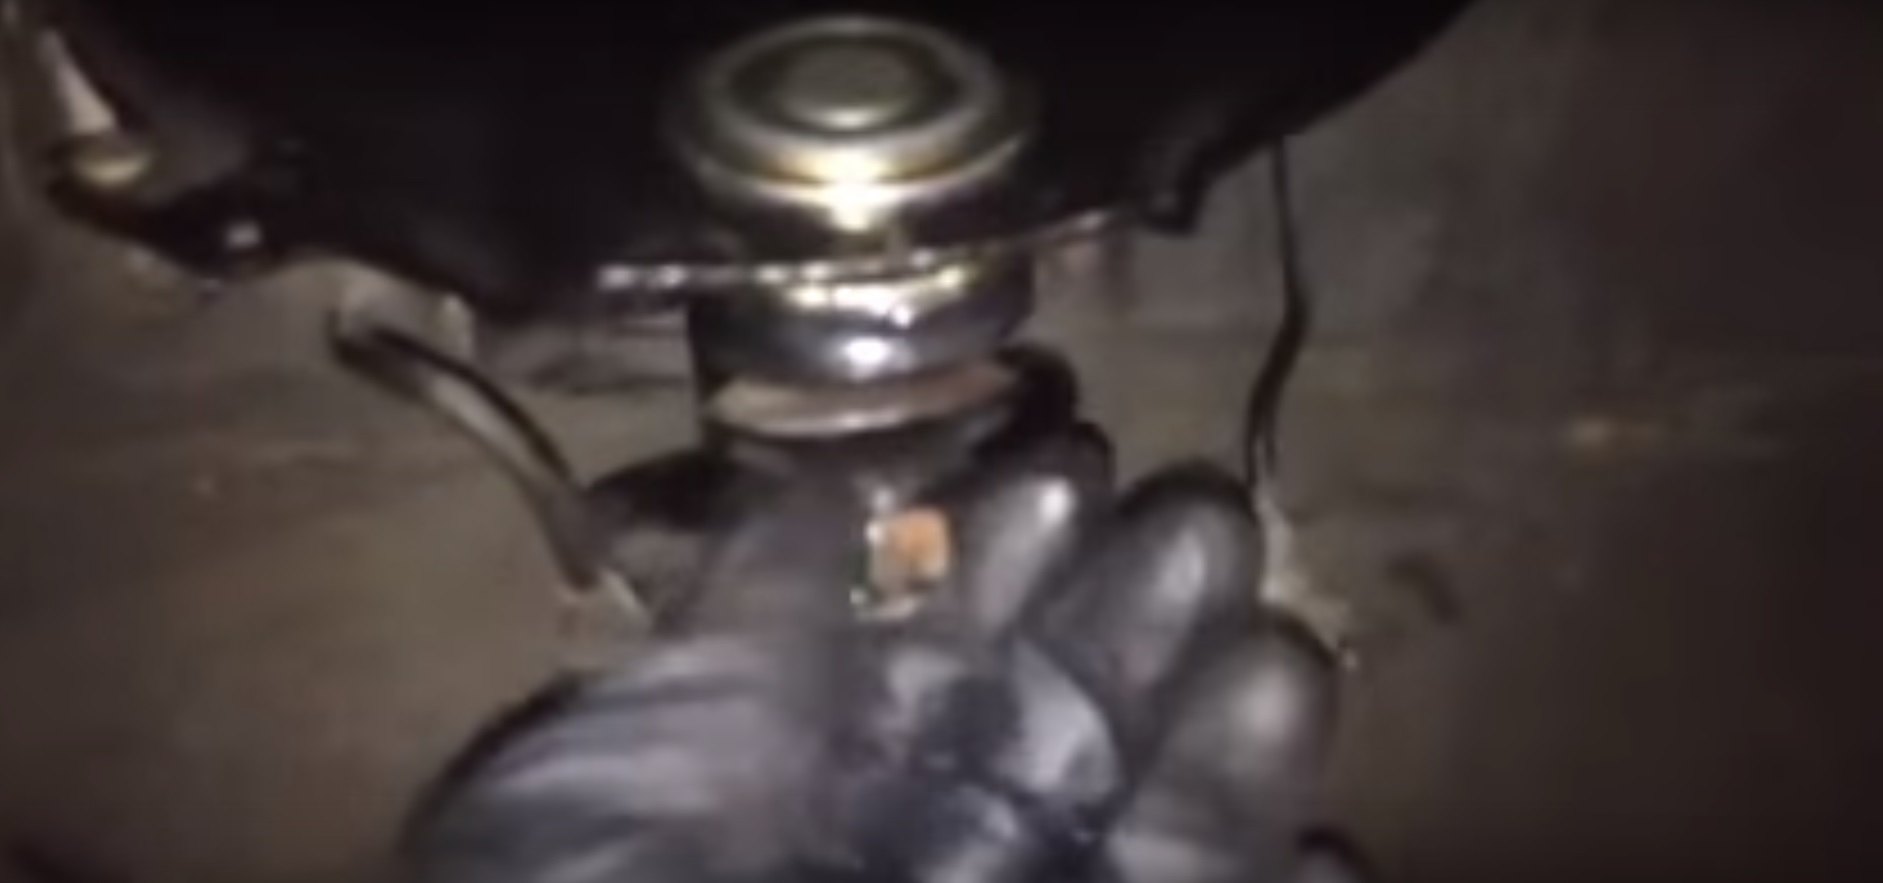 ACURA TSX UPPER LOWER BALL JOINT REPLACE REMOVE CHANGE DIY HOW TO